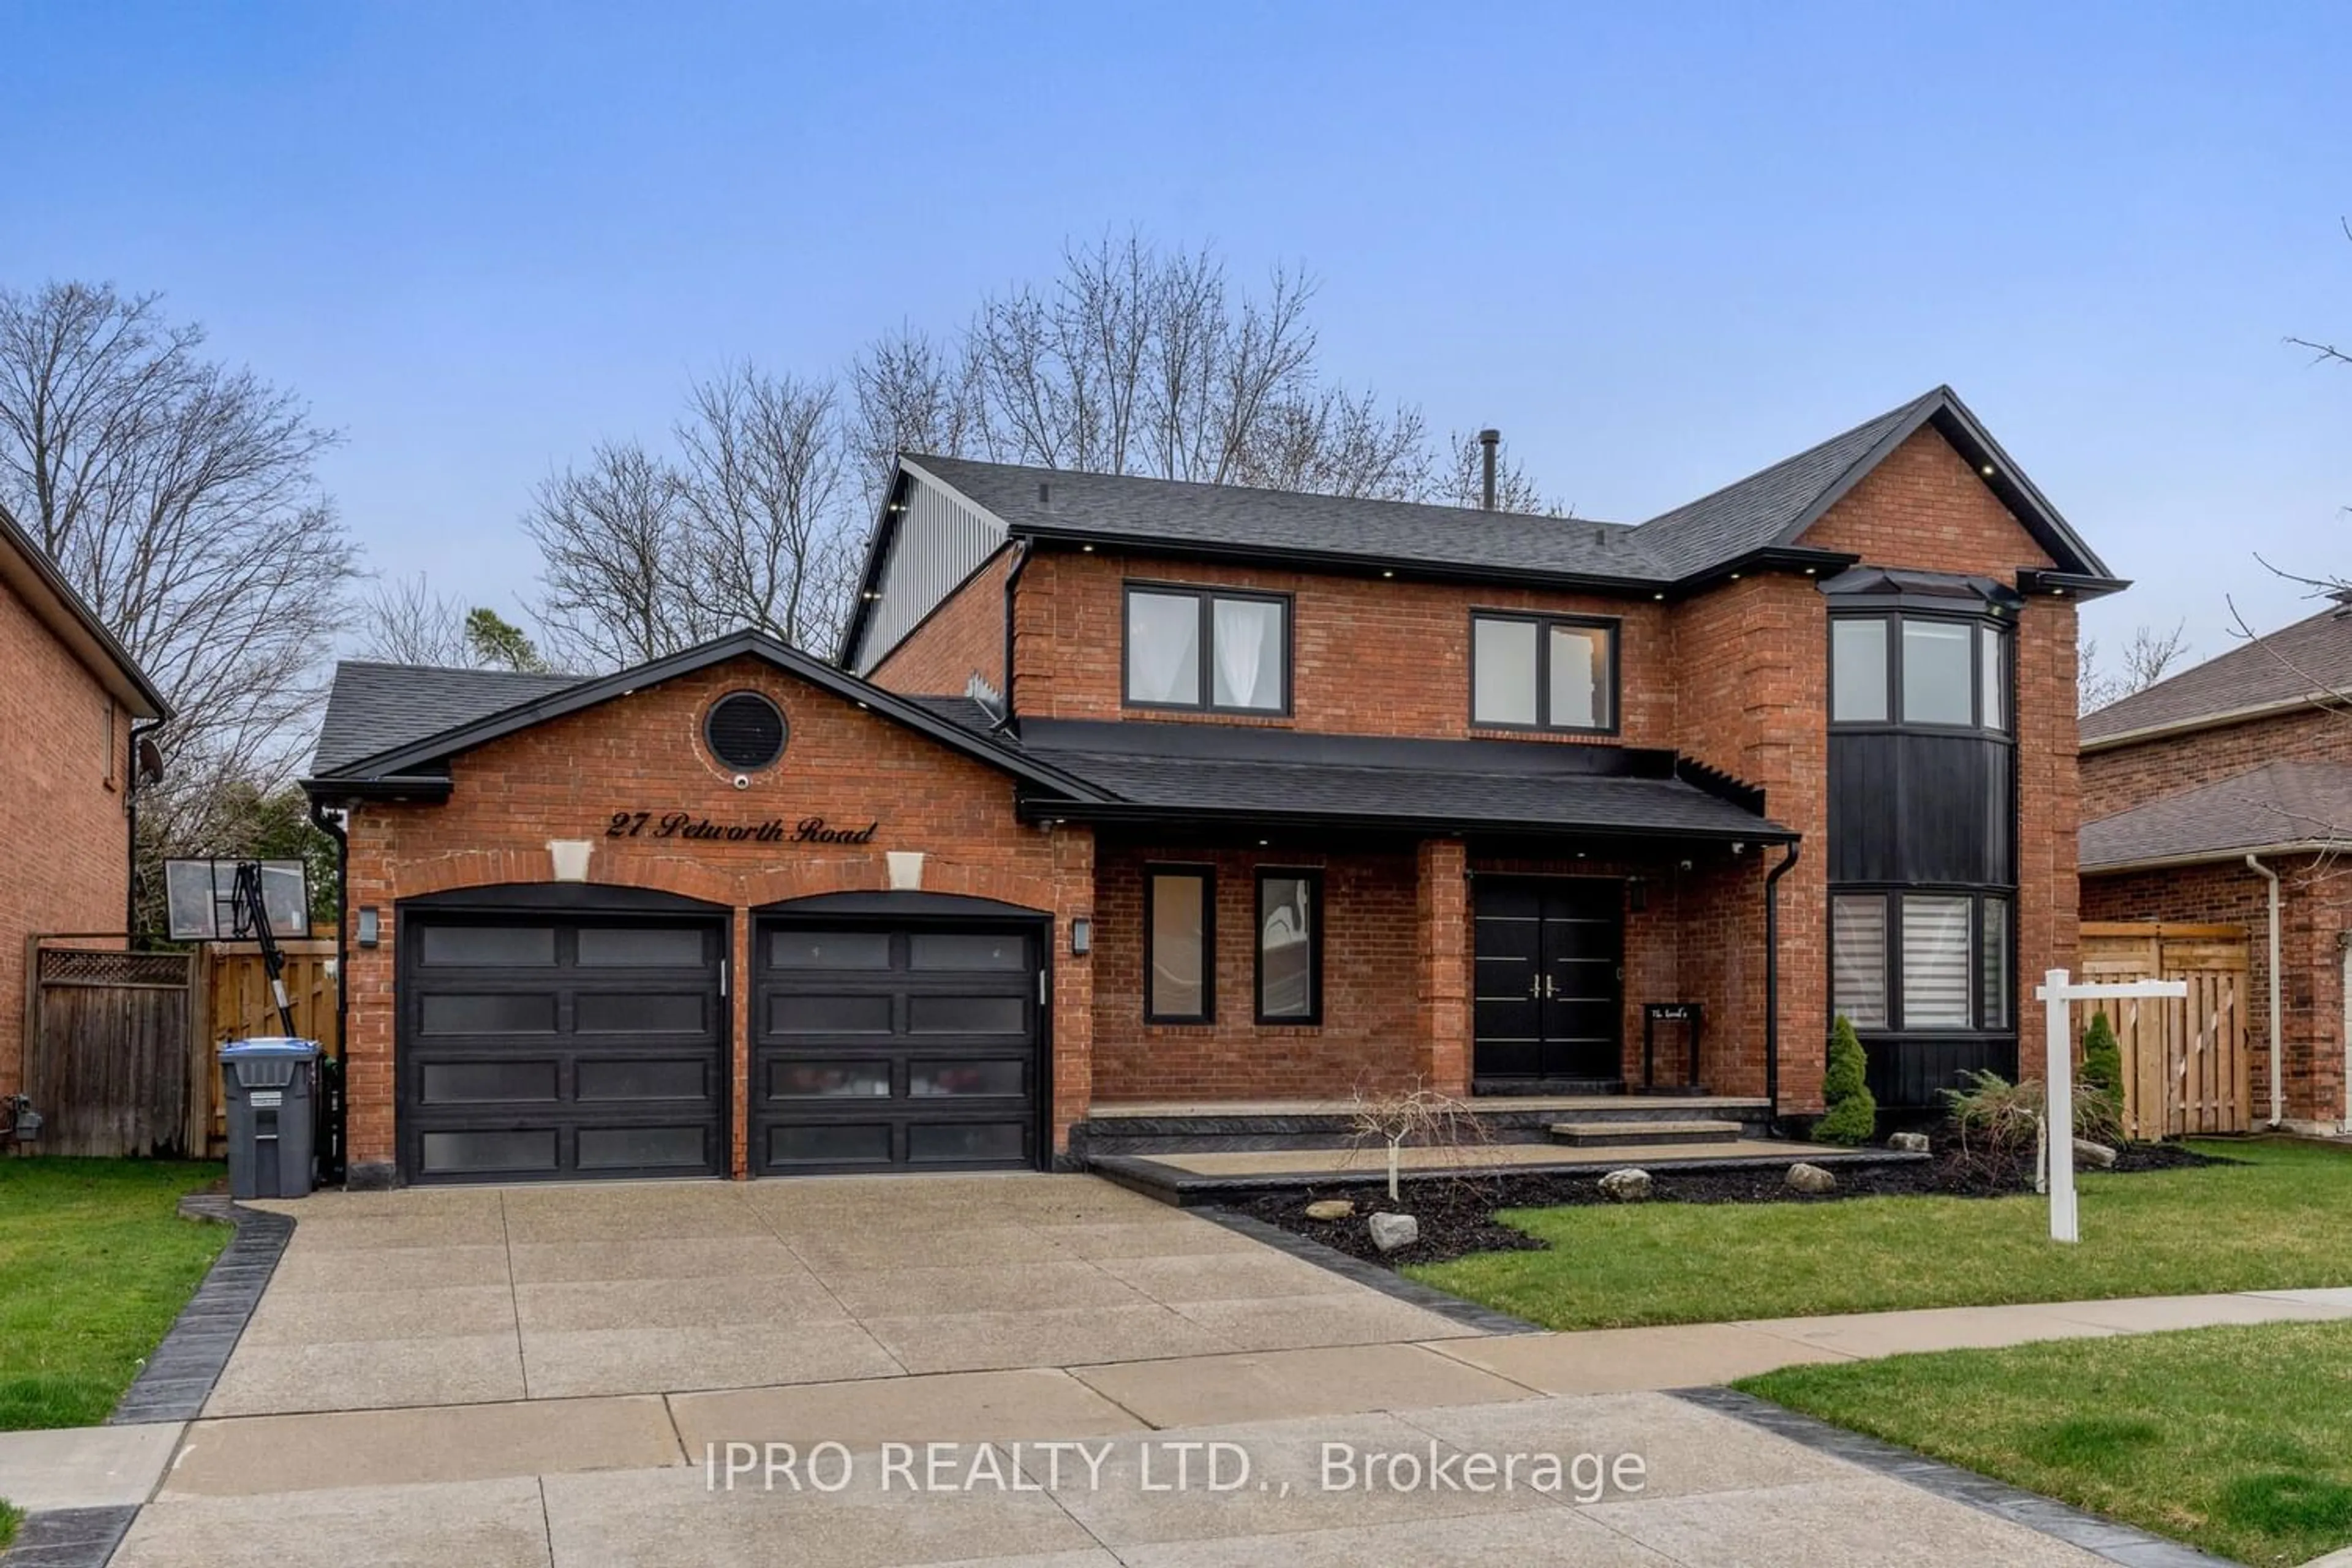 Home with brick exterior material for 27 Petworth Rd, Brampton Ontario L6Z 4C7